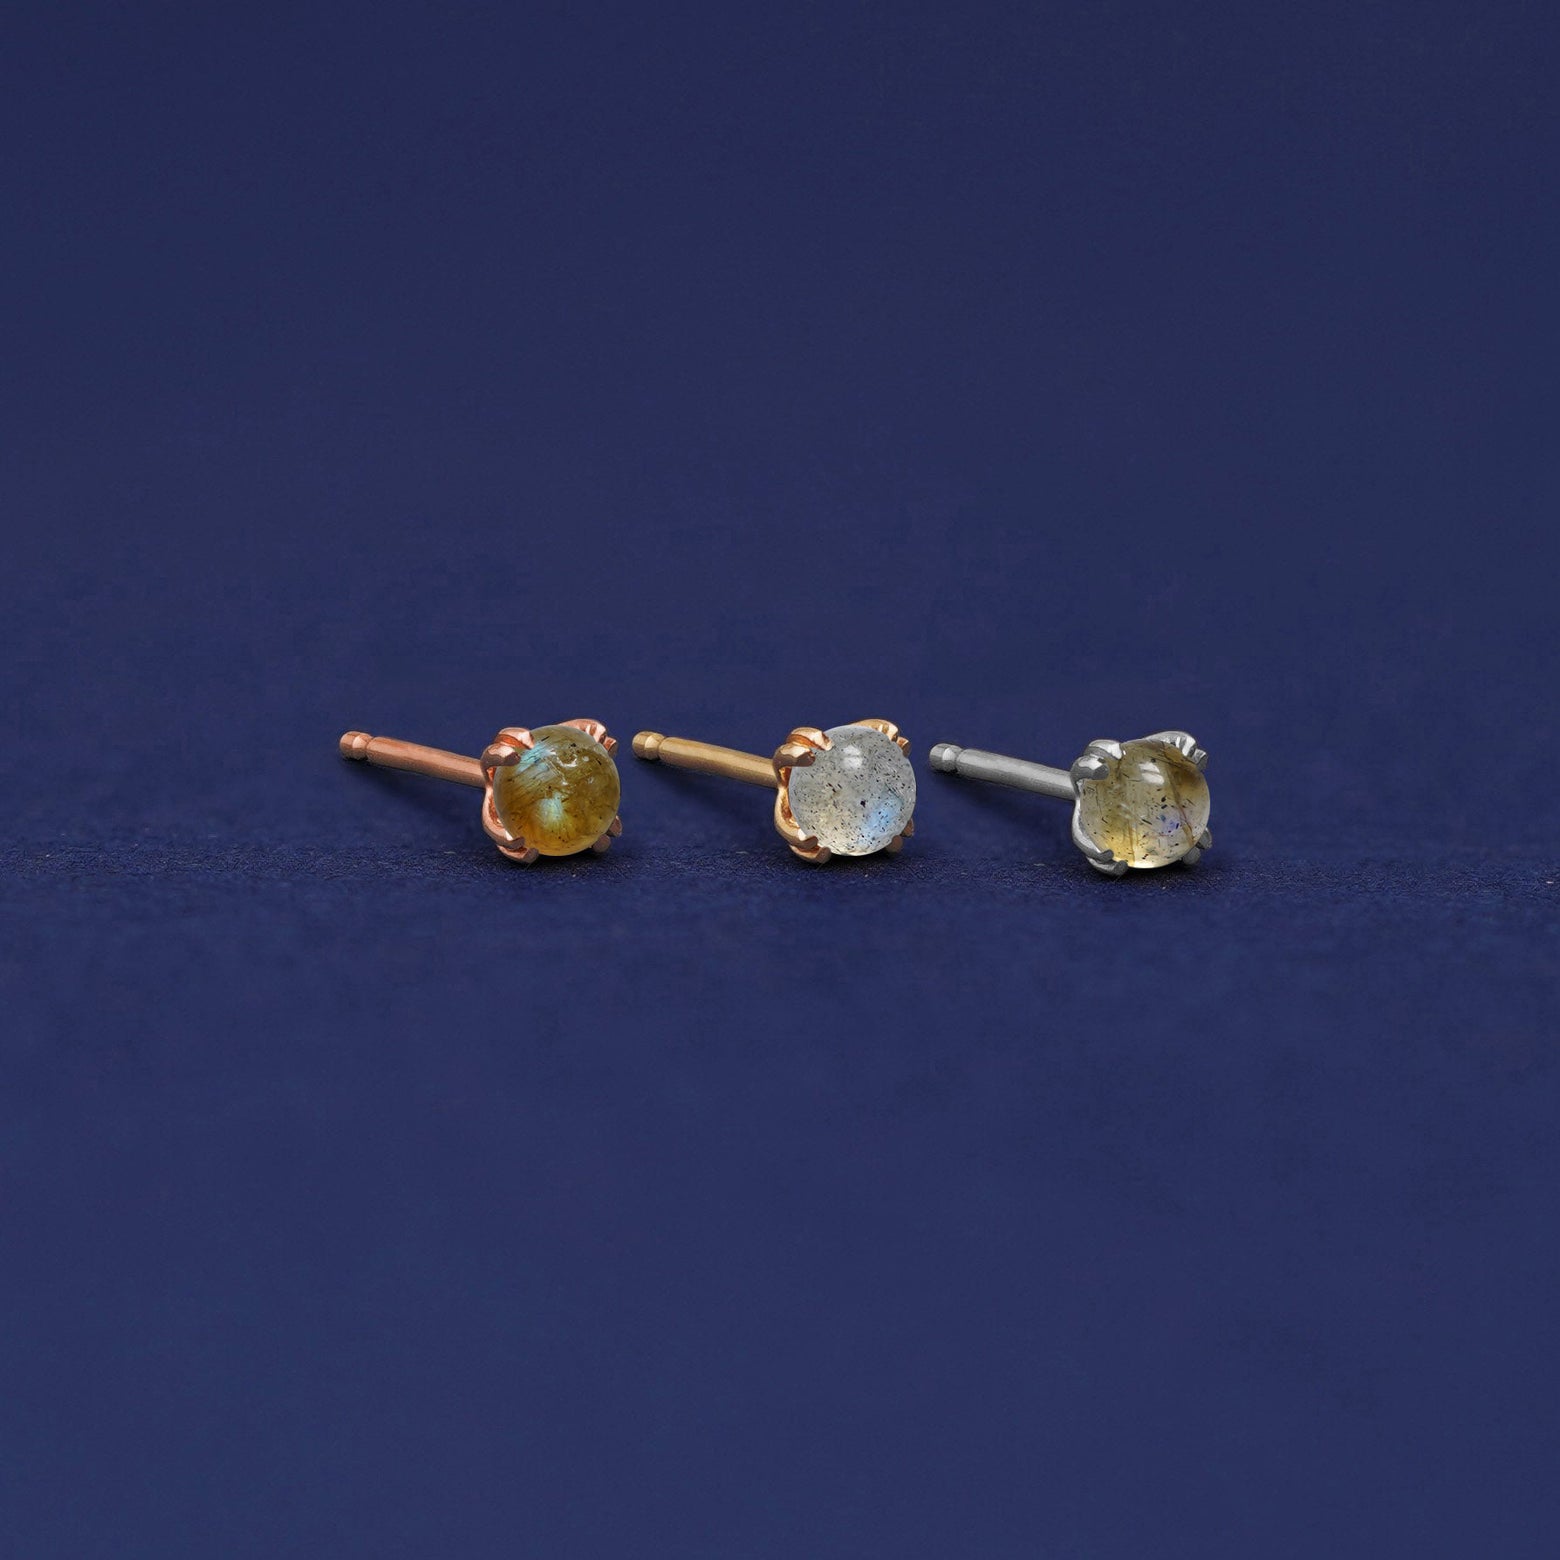 Three versions of the Labradorite Earring shown in options of rose, yellow, and white gold